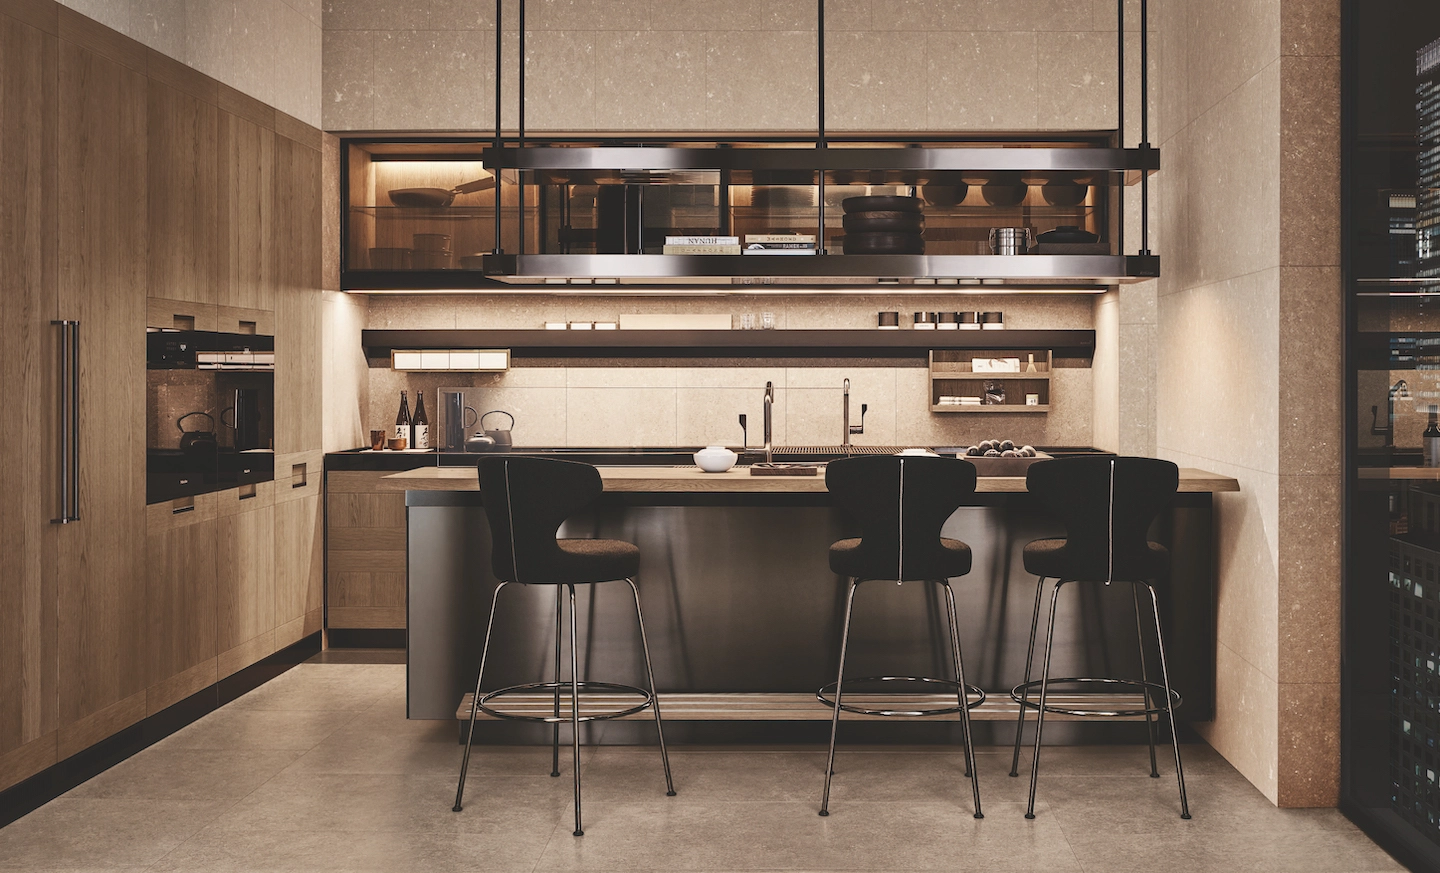 Image of an L-shaped Arclinea kitchen. The columns and shelves are in light wood, the peninsula is in steel with snacks in light wood.